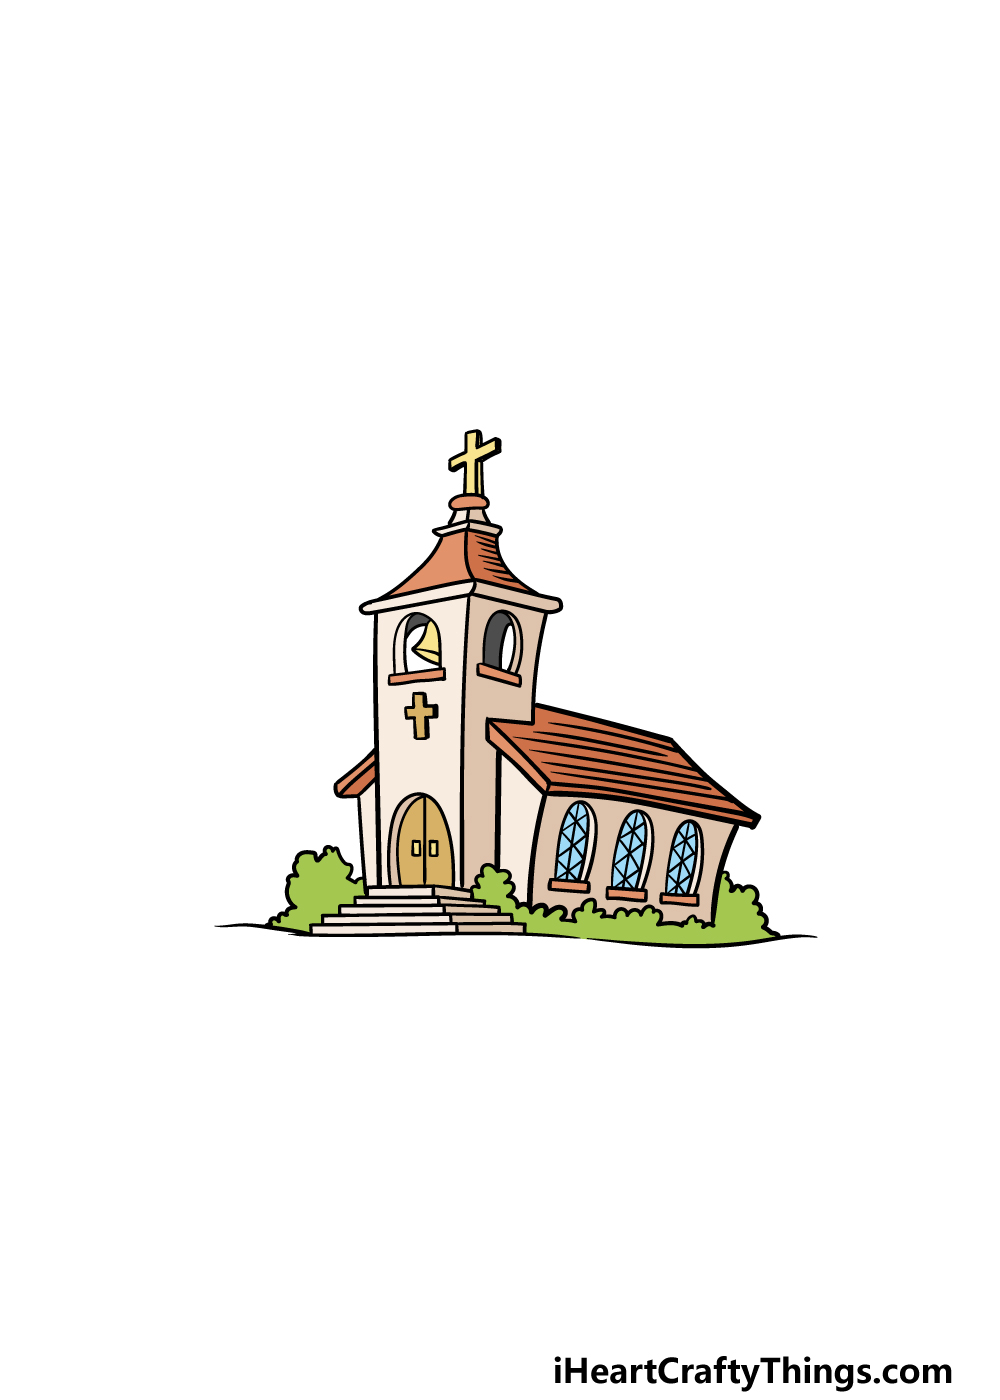 Church Sketch Vector PNG Images Simple Black And White Sketch Of A Church  Vector Illustration Church Icon Logo PNG Image For Free Download